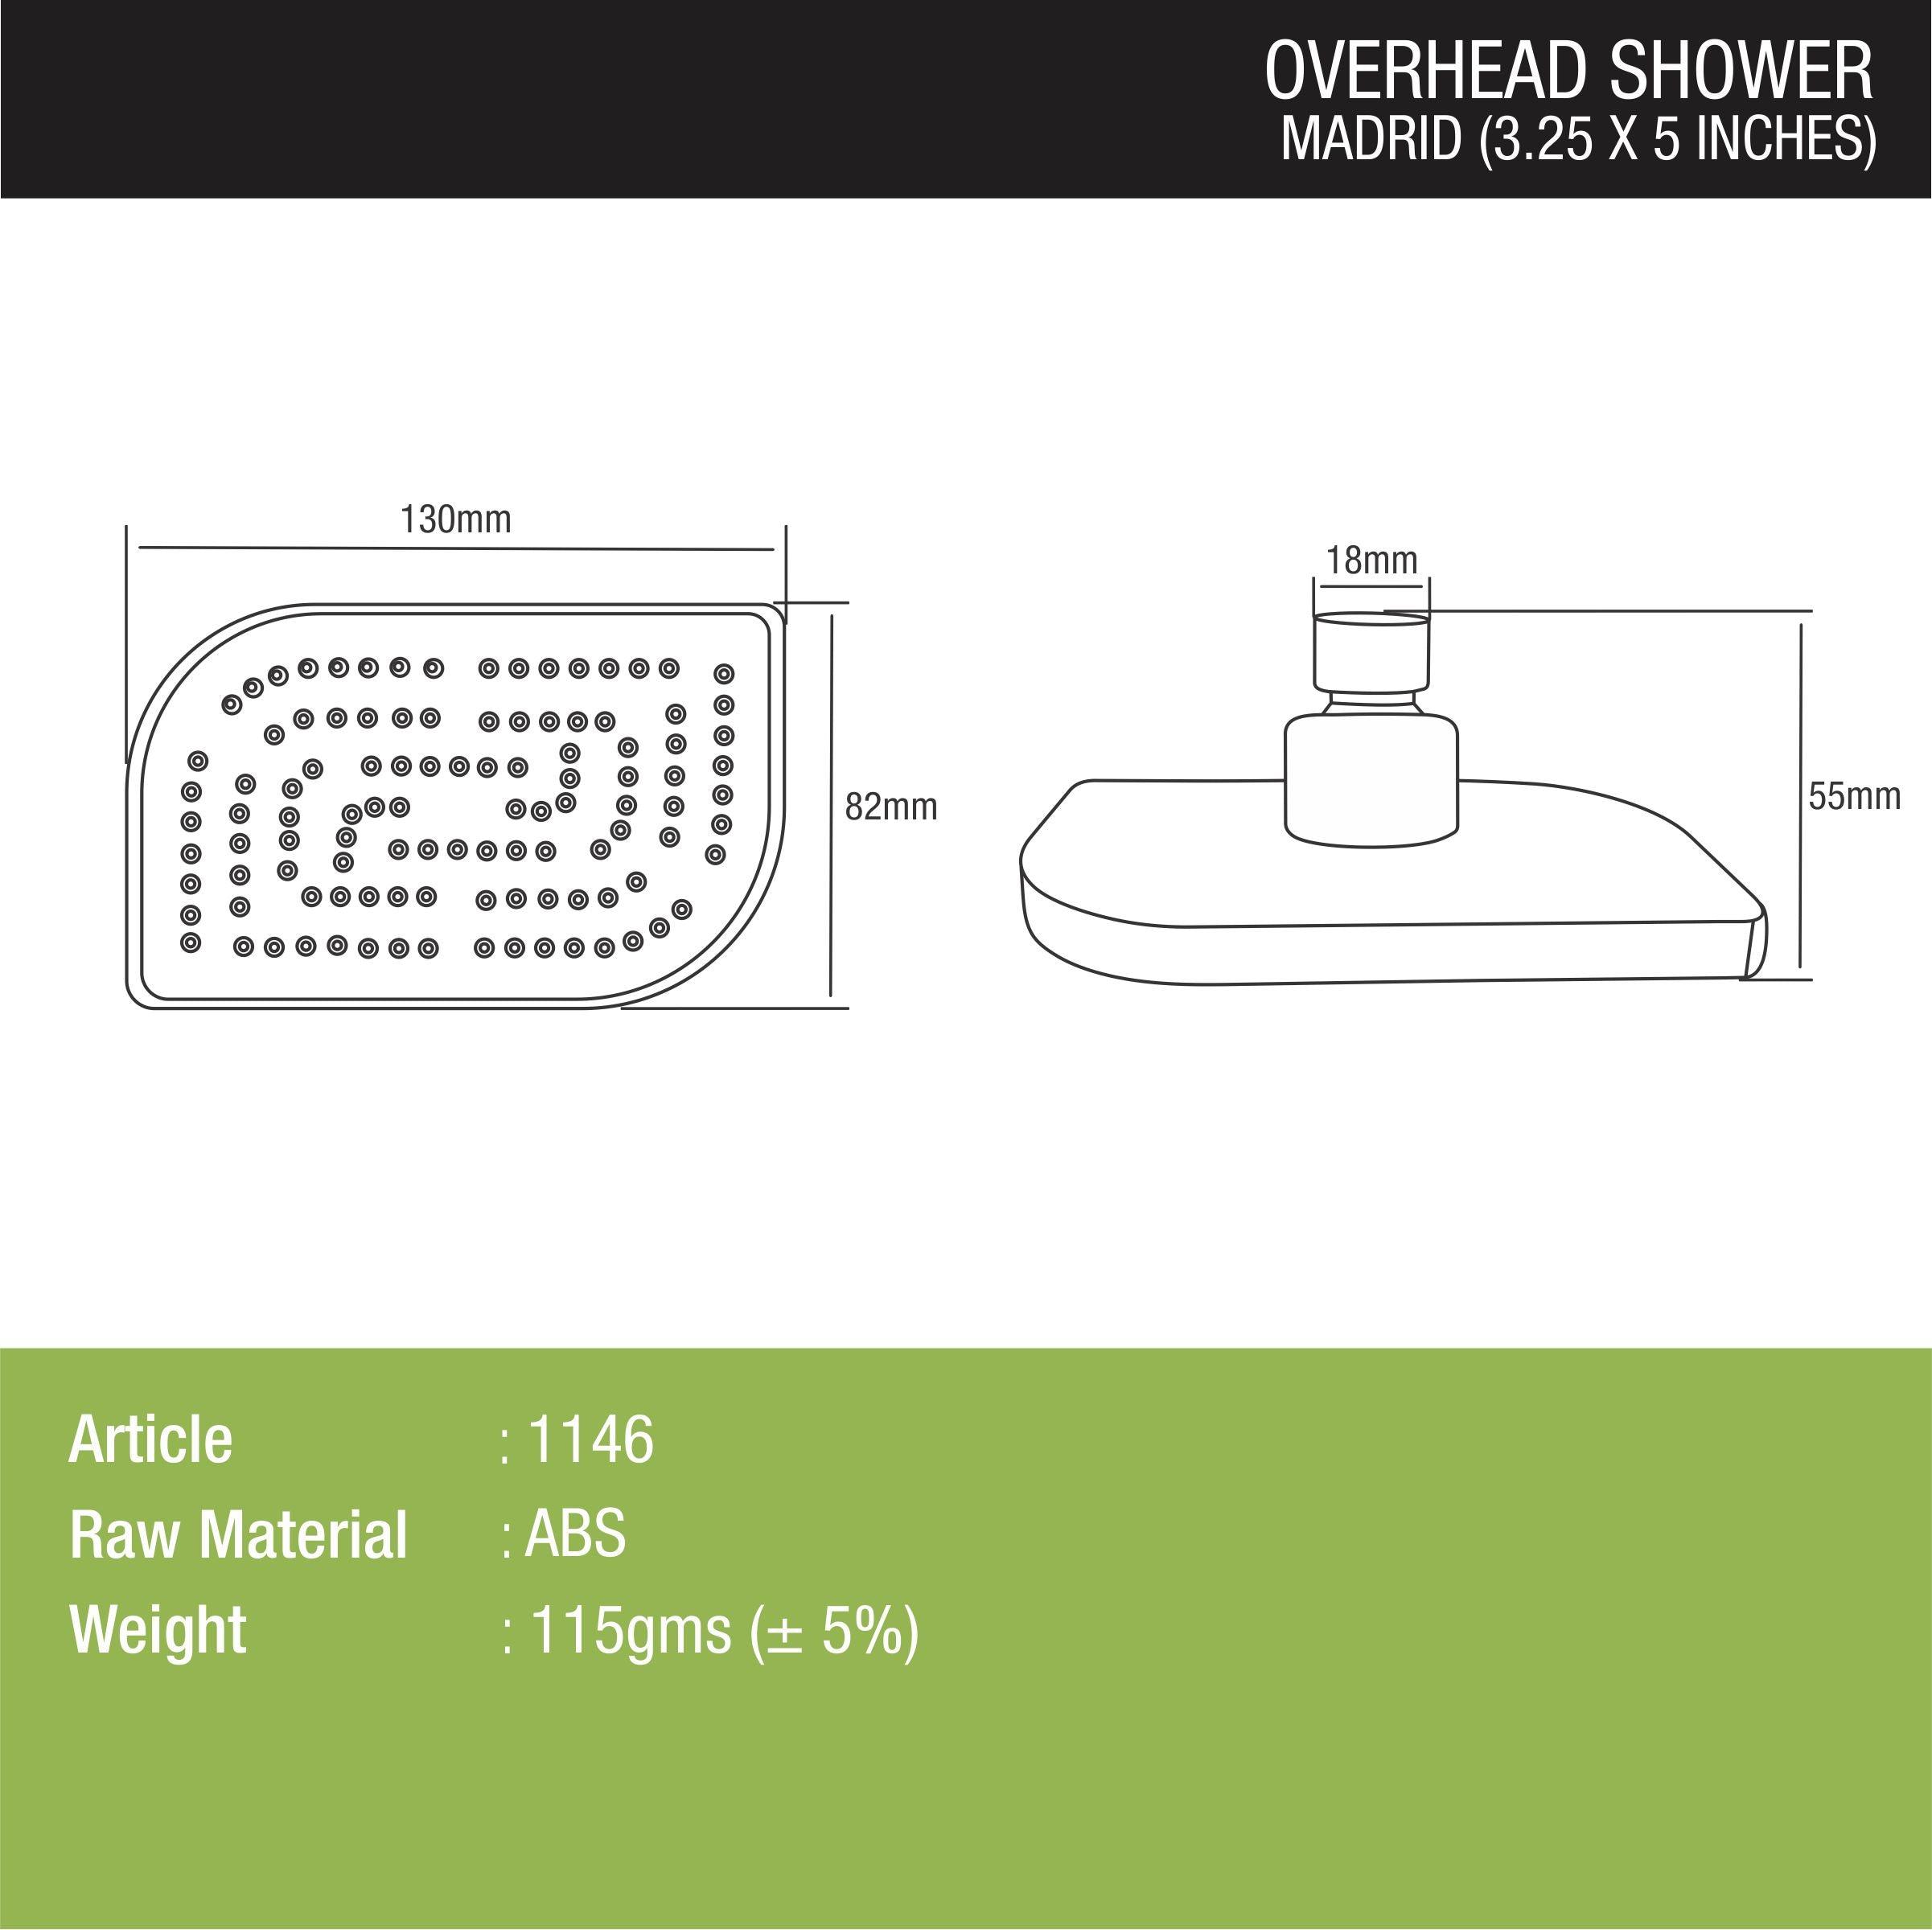 Madrid Overhead Shower (3.25 x 5 Inches) dimensions and sizes